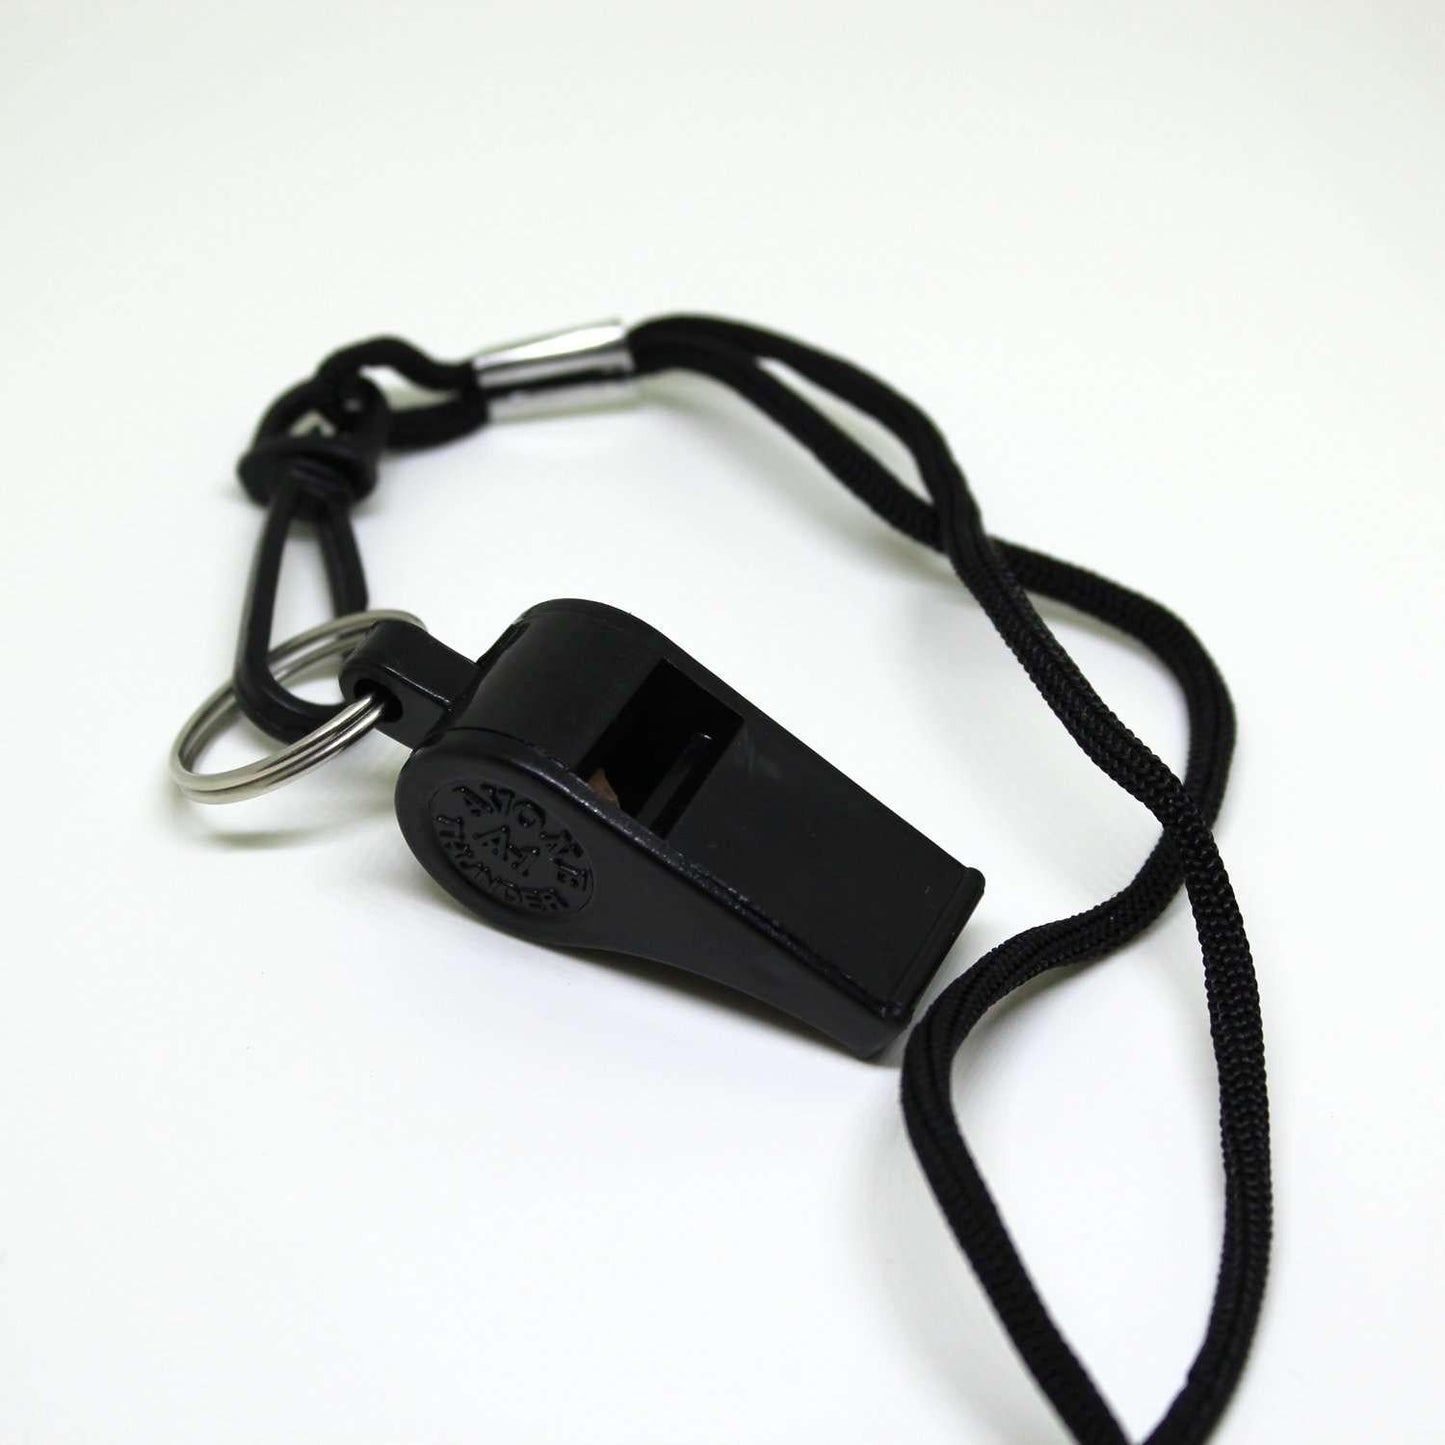 Referees whistle with lanyard - Fitness Health 